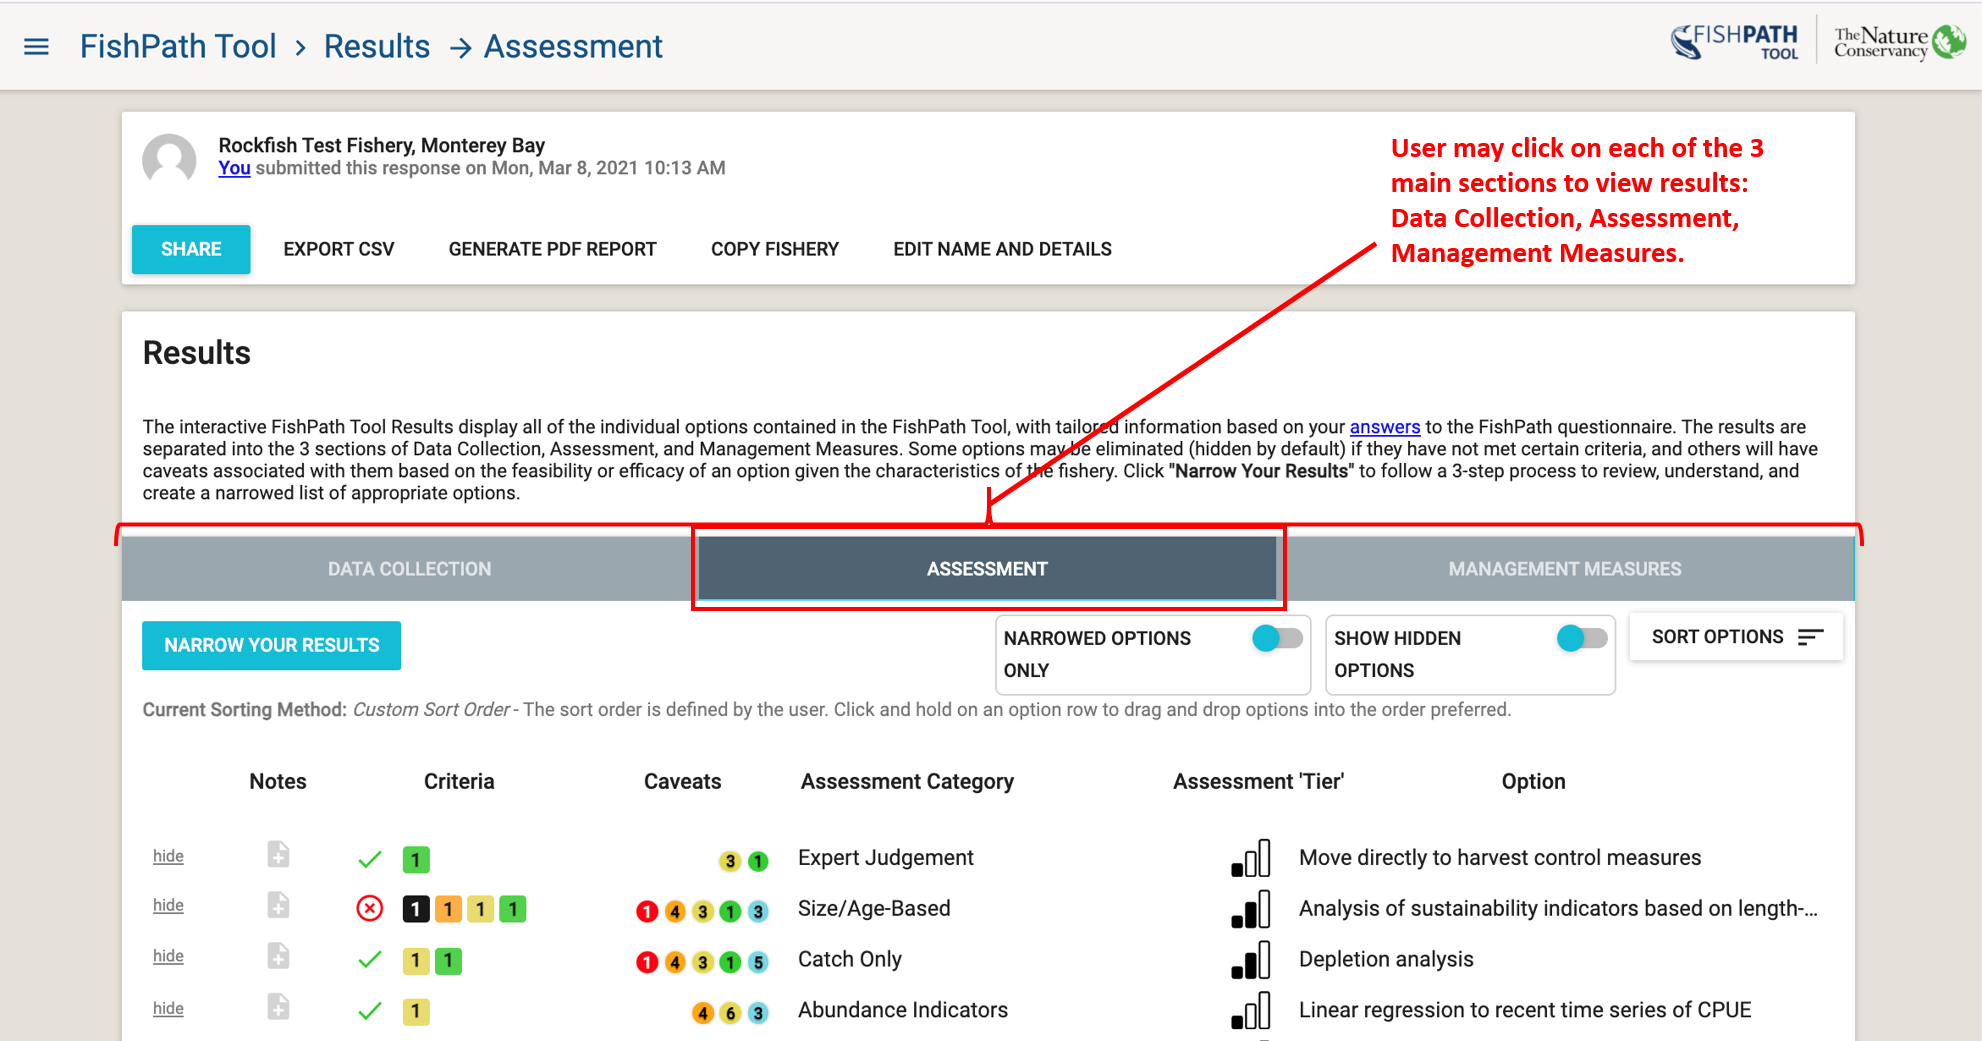 Initial results display screen in the FishPath Tool (featuring the Assessment section in the red box), displaying a snapshot of results, not a full listing.